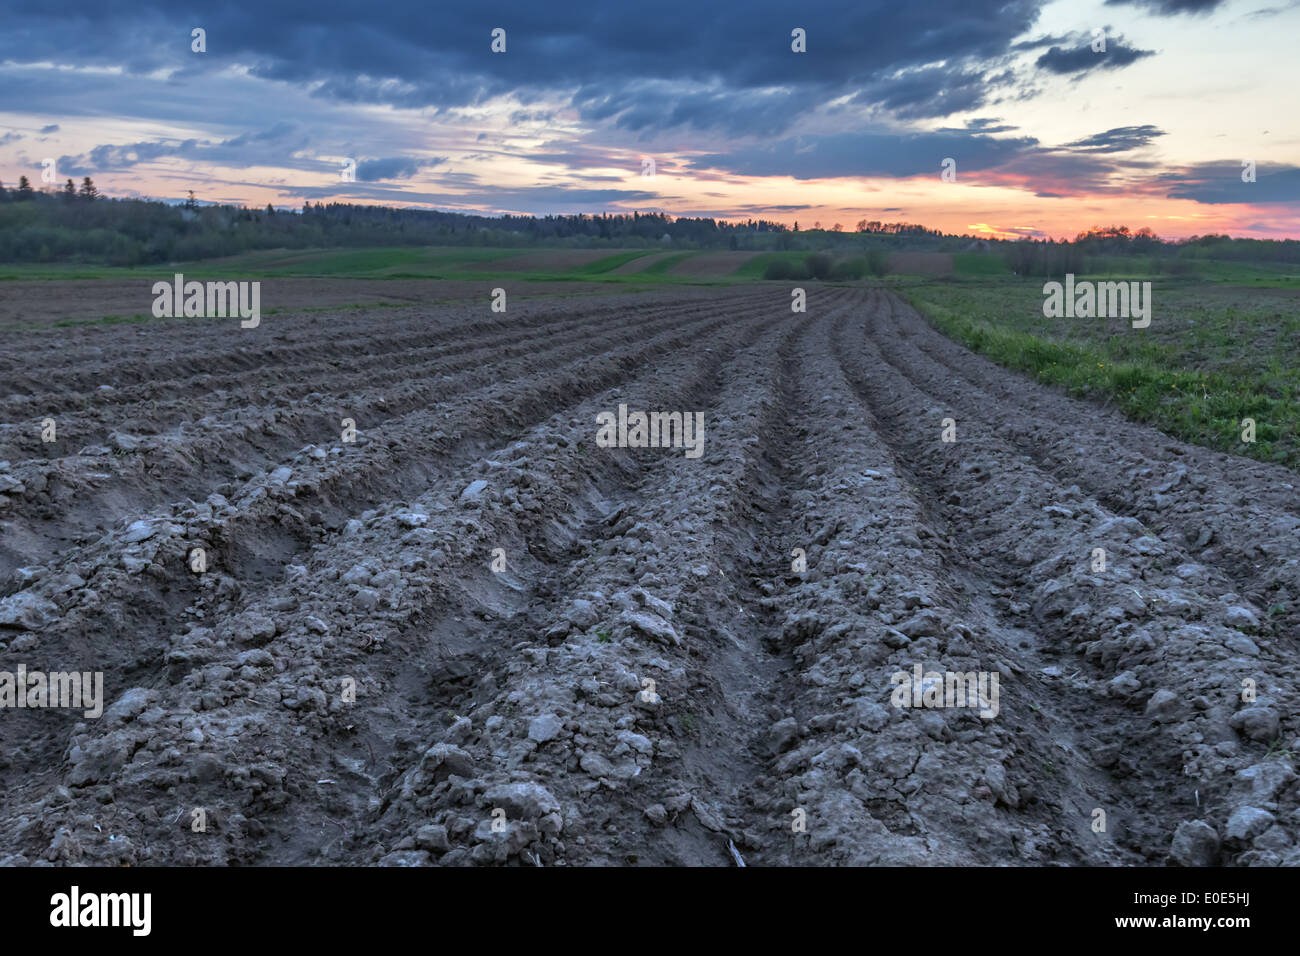 agriculture field on sunset time Stock Photo